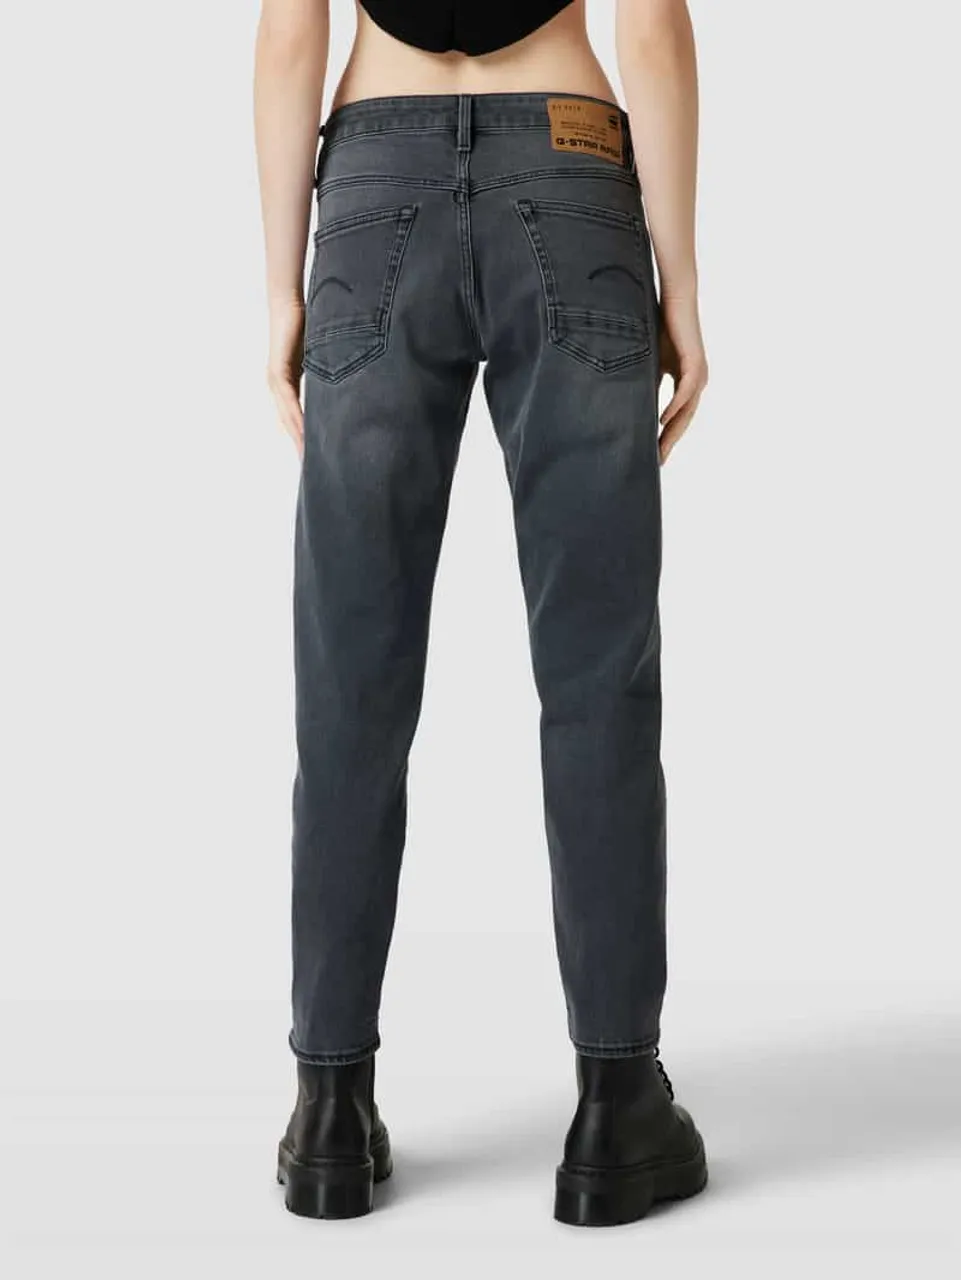 G-Star Raw Jeans mit Label-Details Modell 'Kate' in Anthrazit